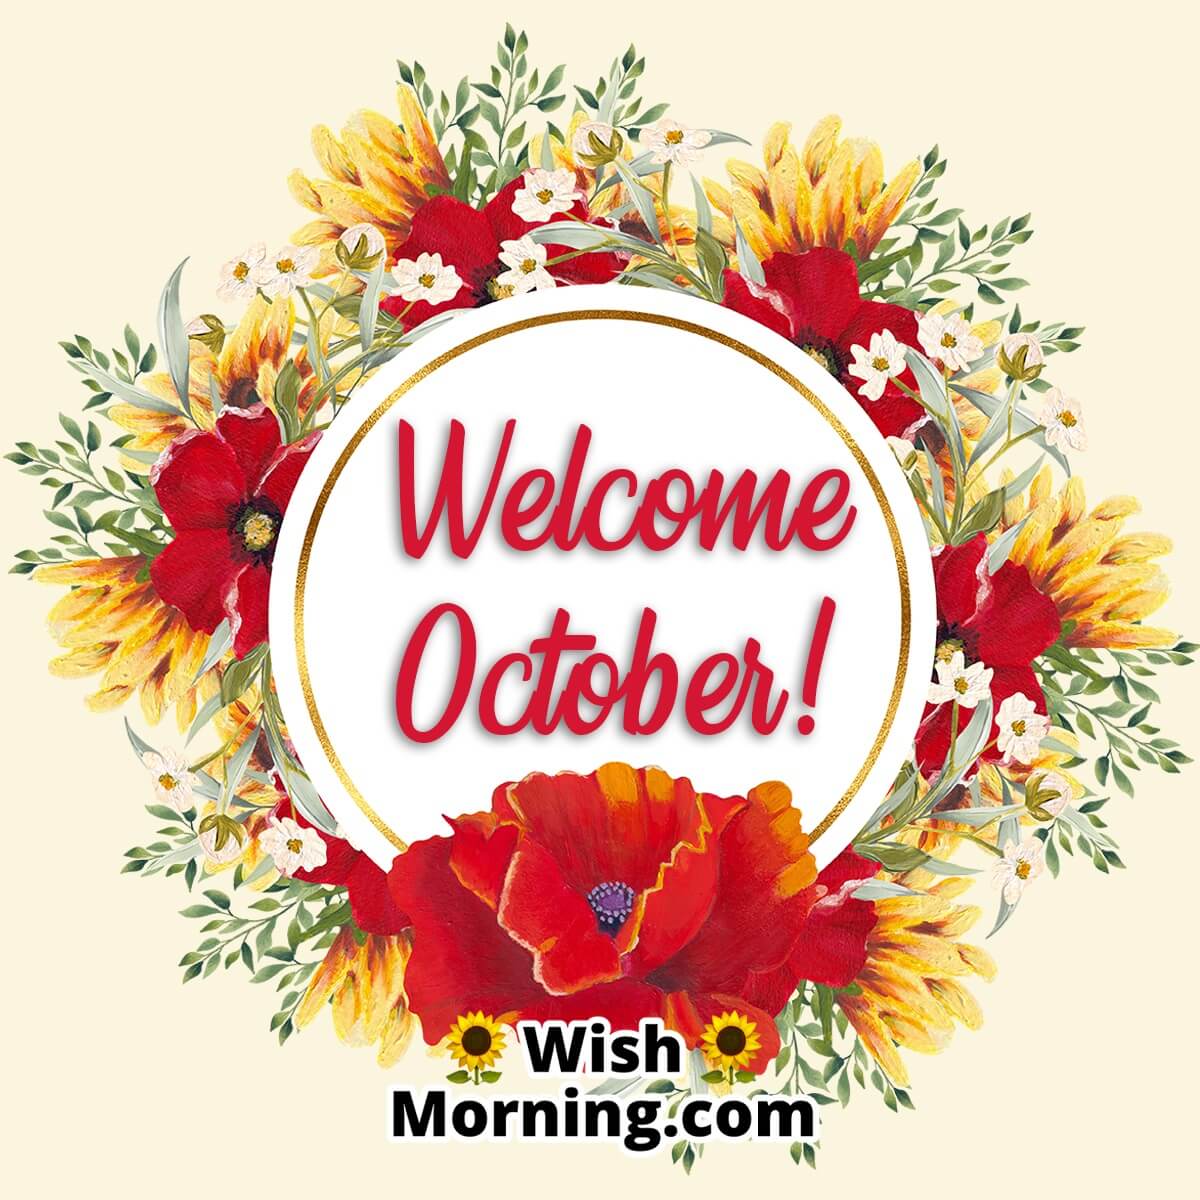 Welcome October Image